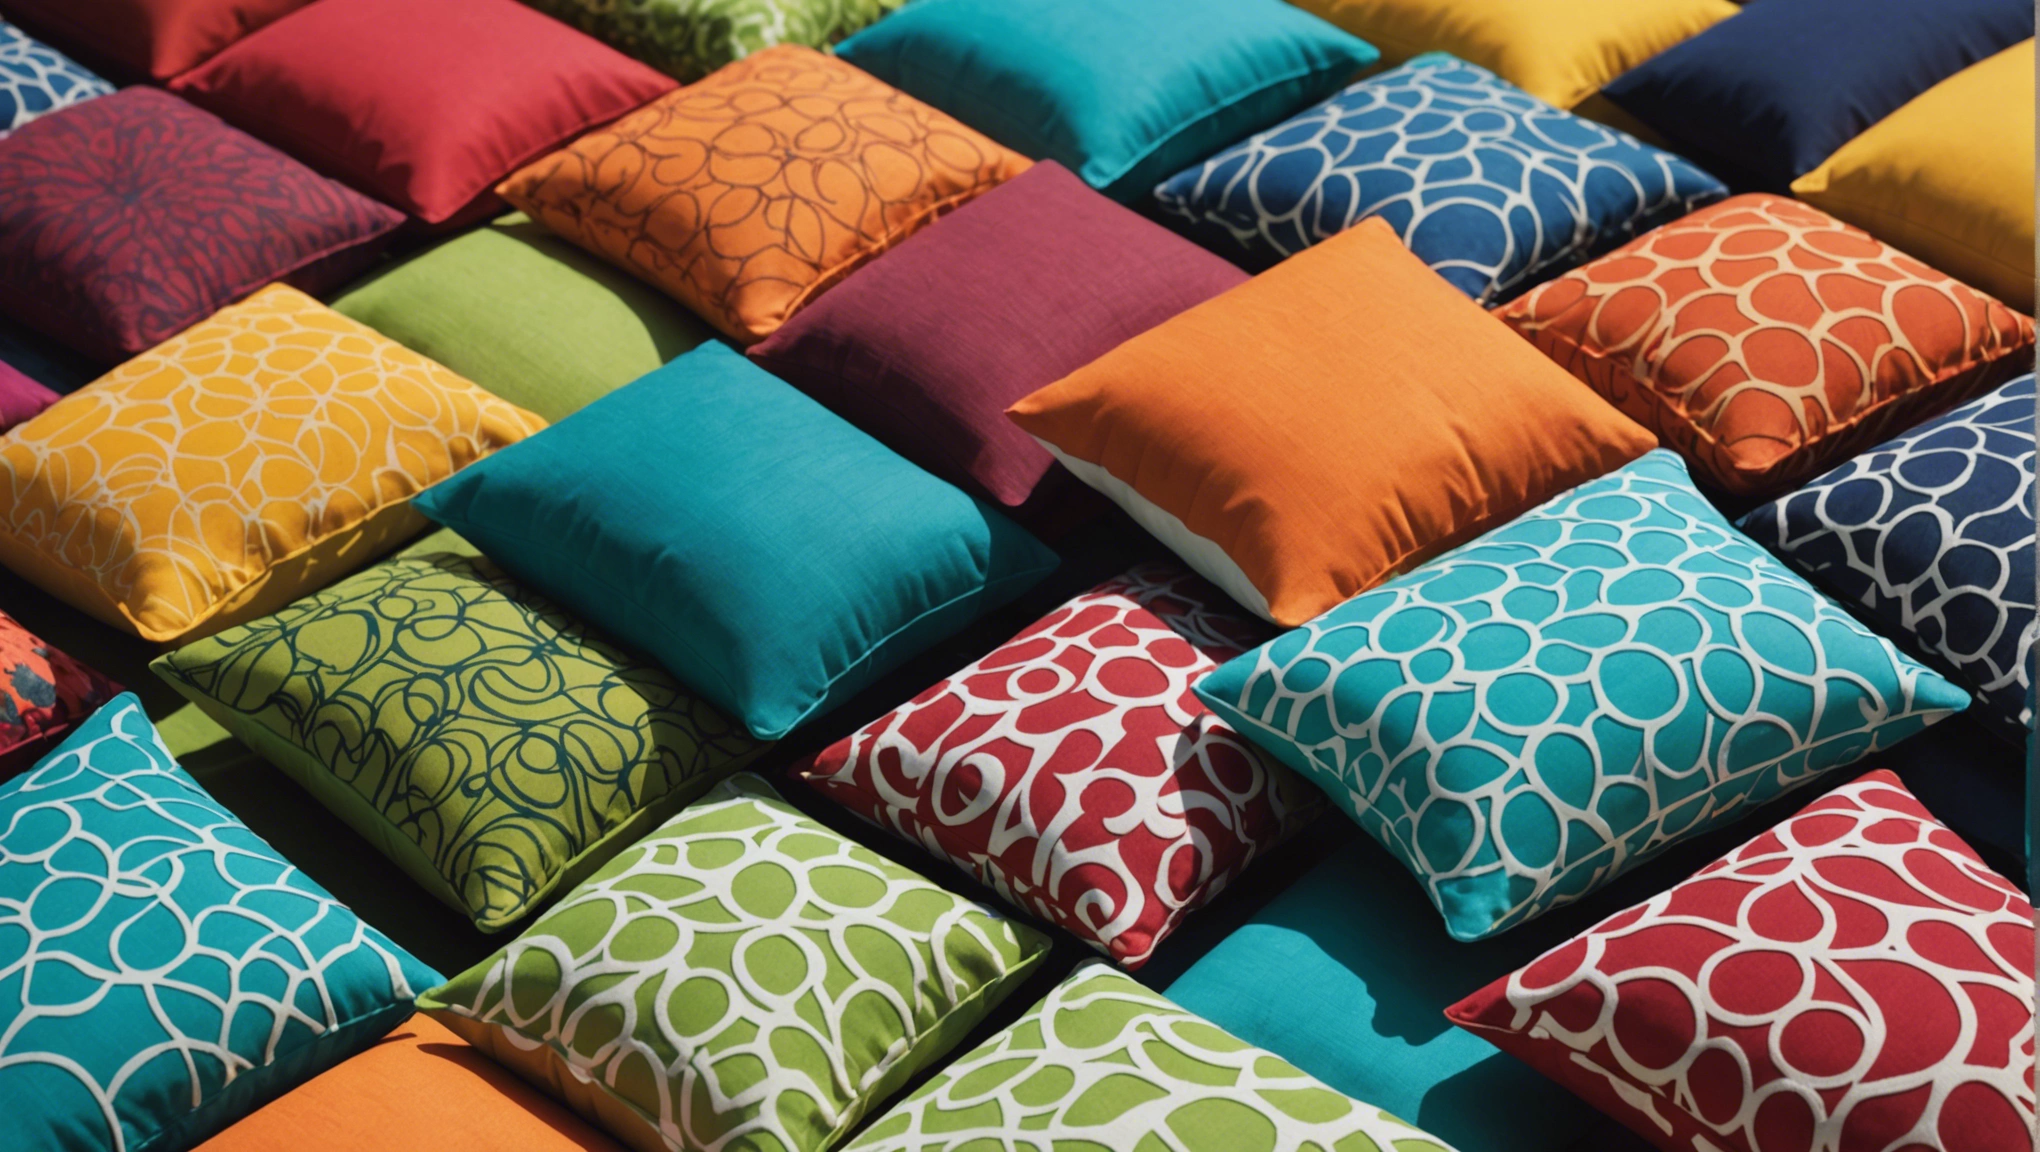 Challenge Perfection with Jaw-dropping Sunbrella Fabrics for Cushions and More!